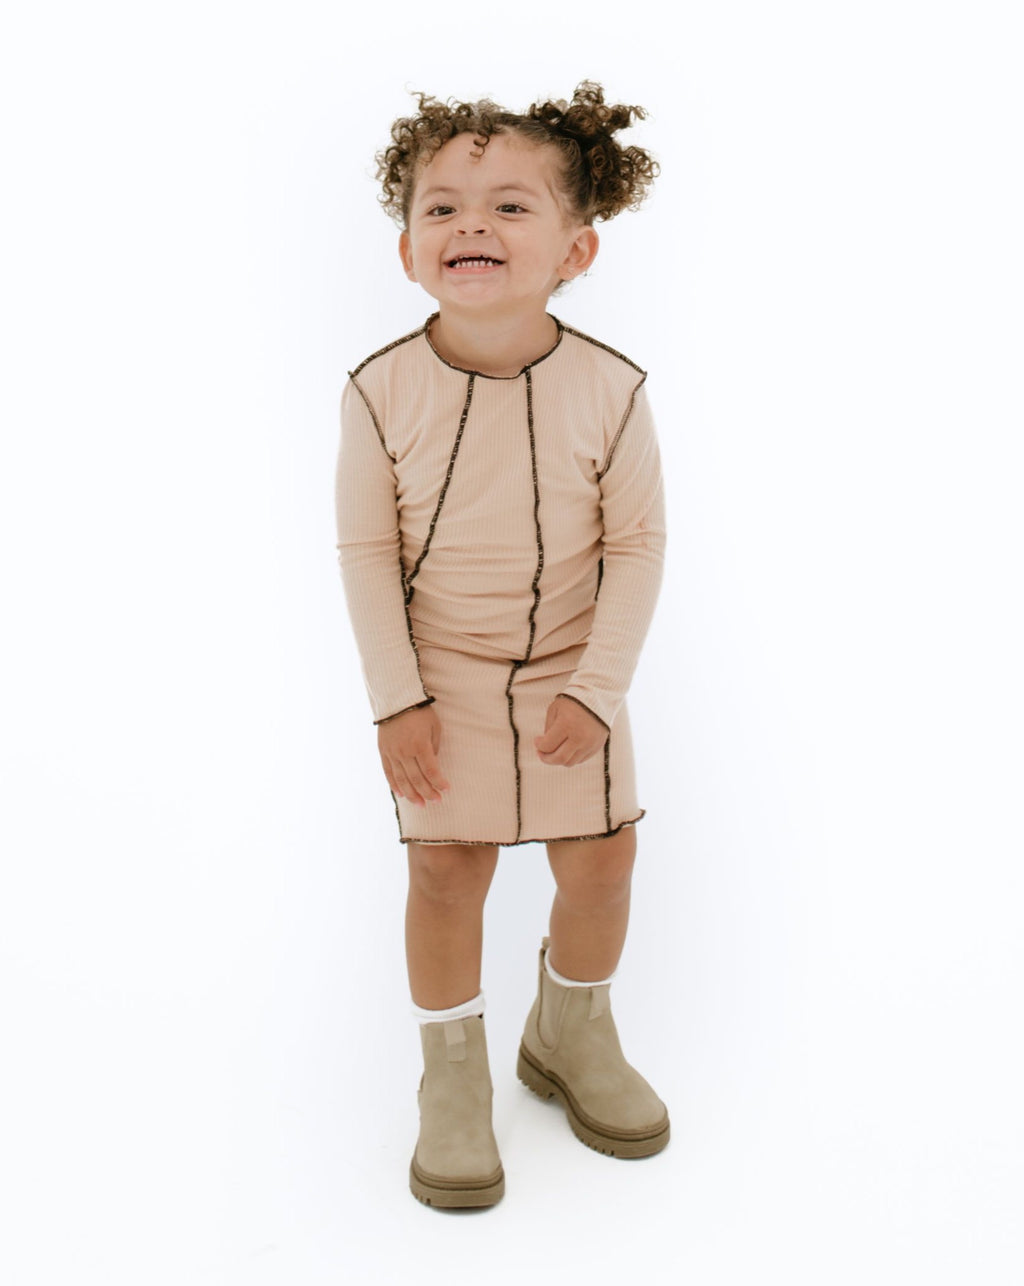 Mommy's Girl  Long Sleeve Dress (Nude/Brown)(Baby)